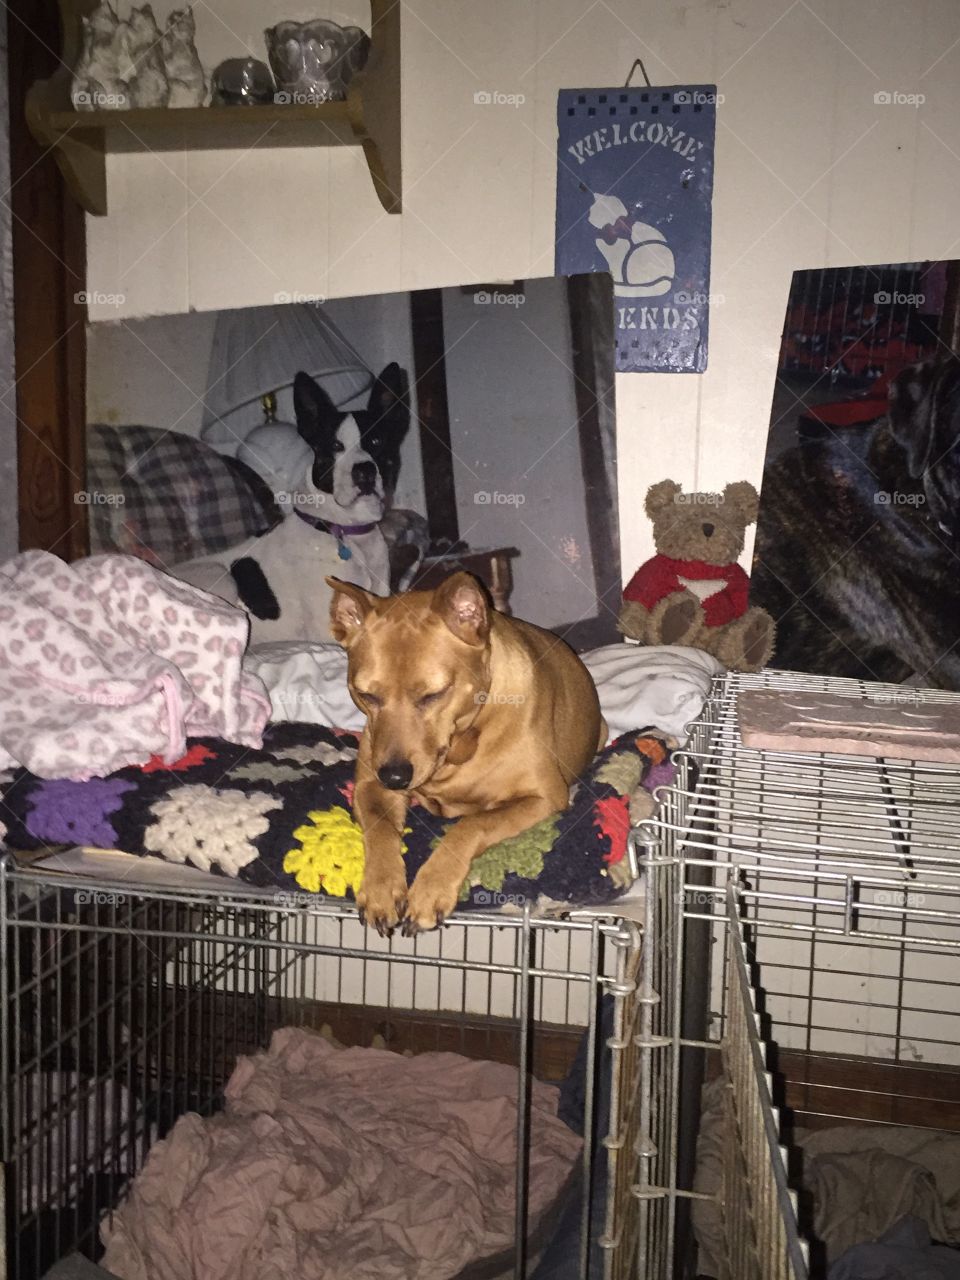 Min pin hanging out on top of her bed